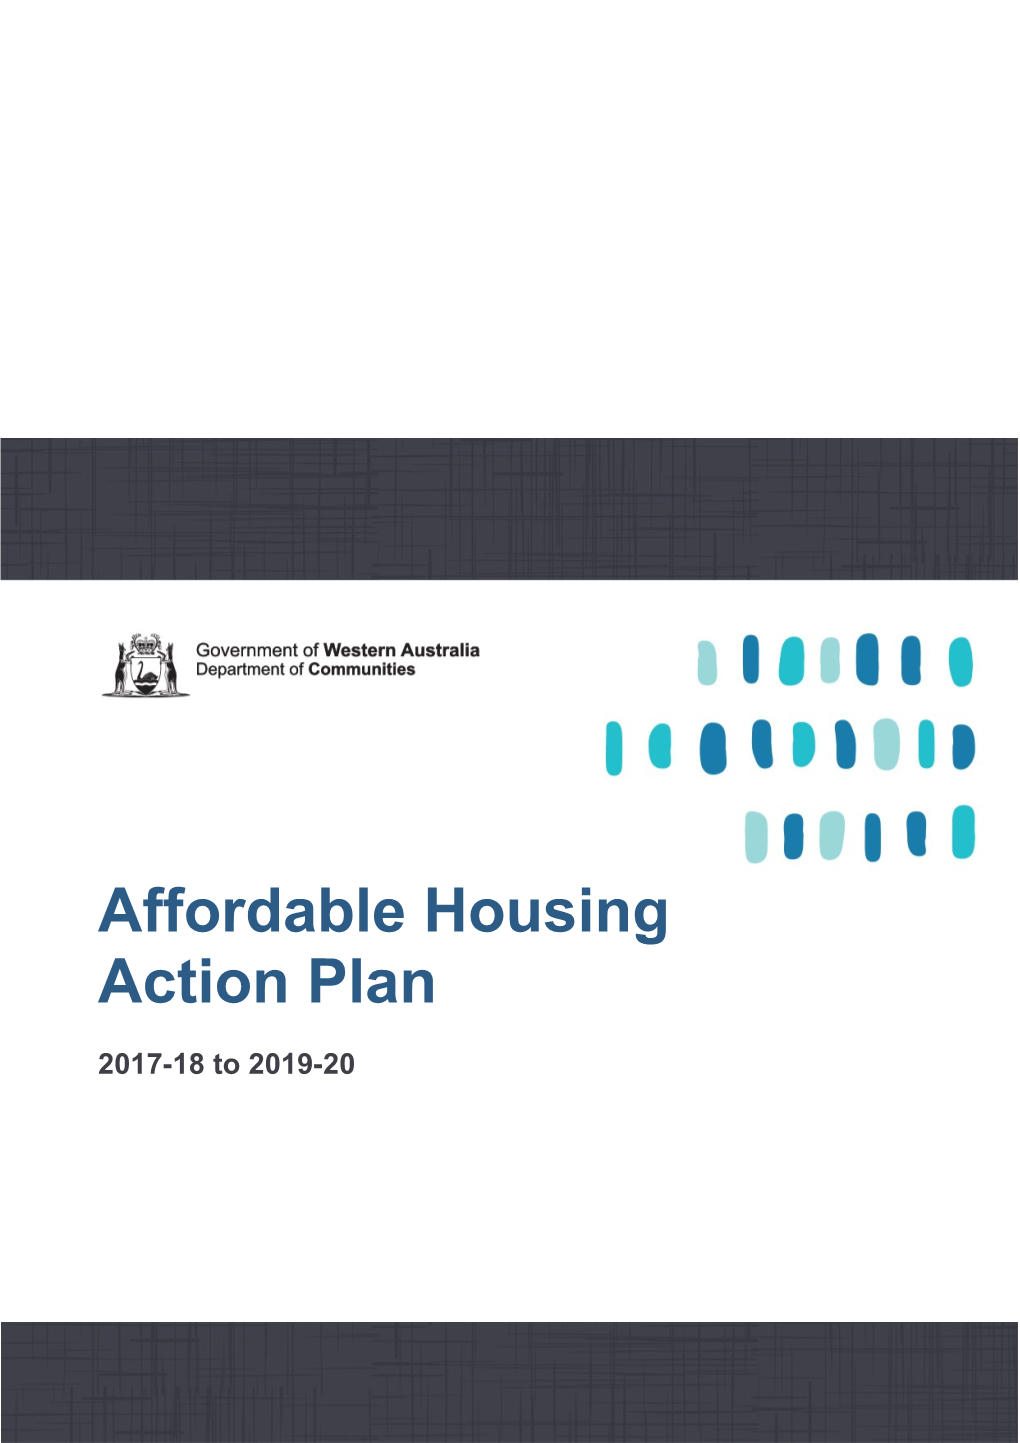 Affordable Housing Action Plan 2017-2018 to 2019-2020